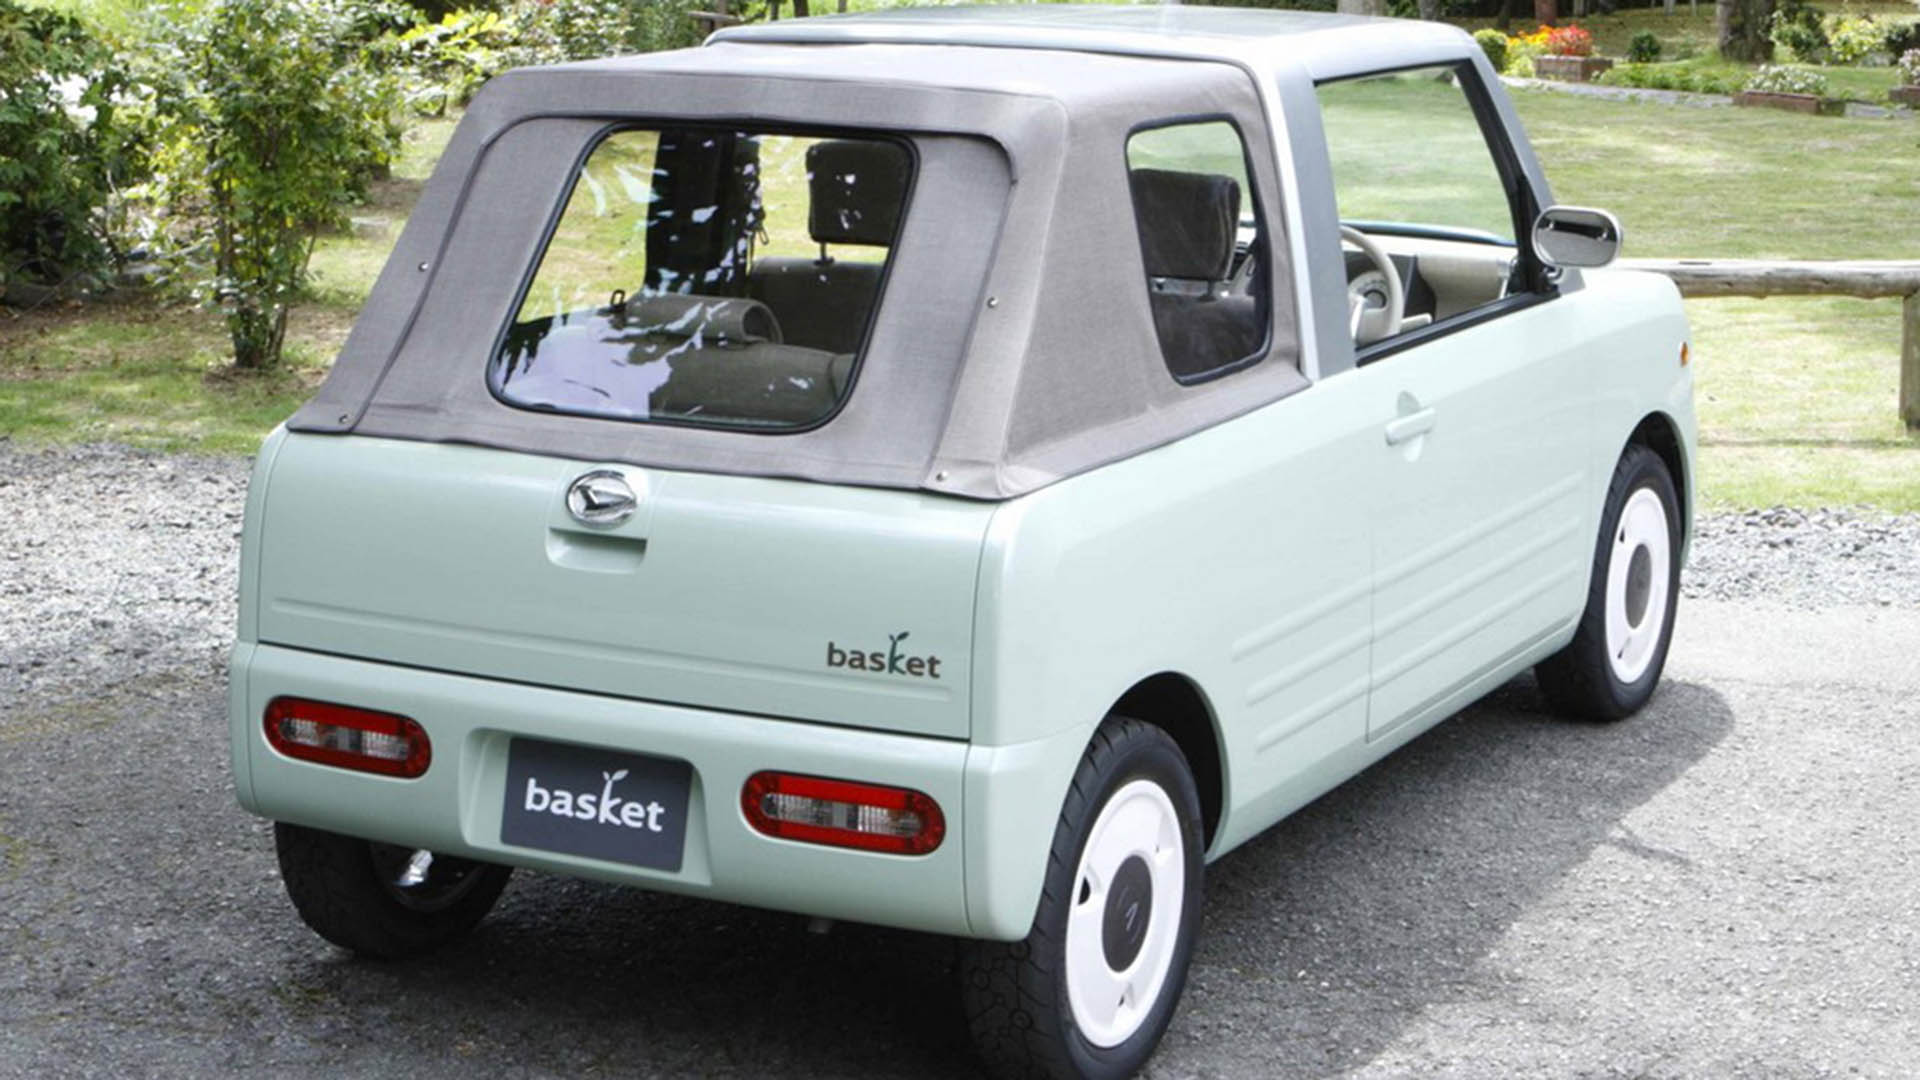 Daihatsu Basket with the roof up